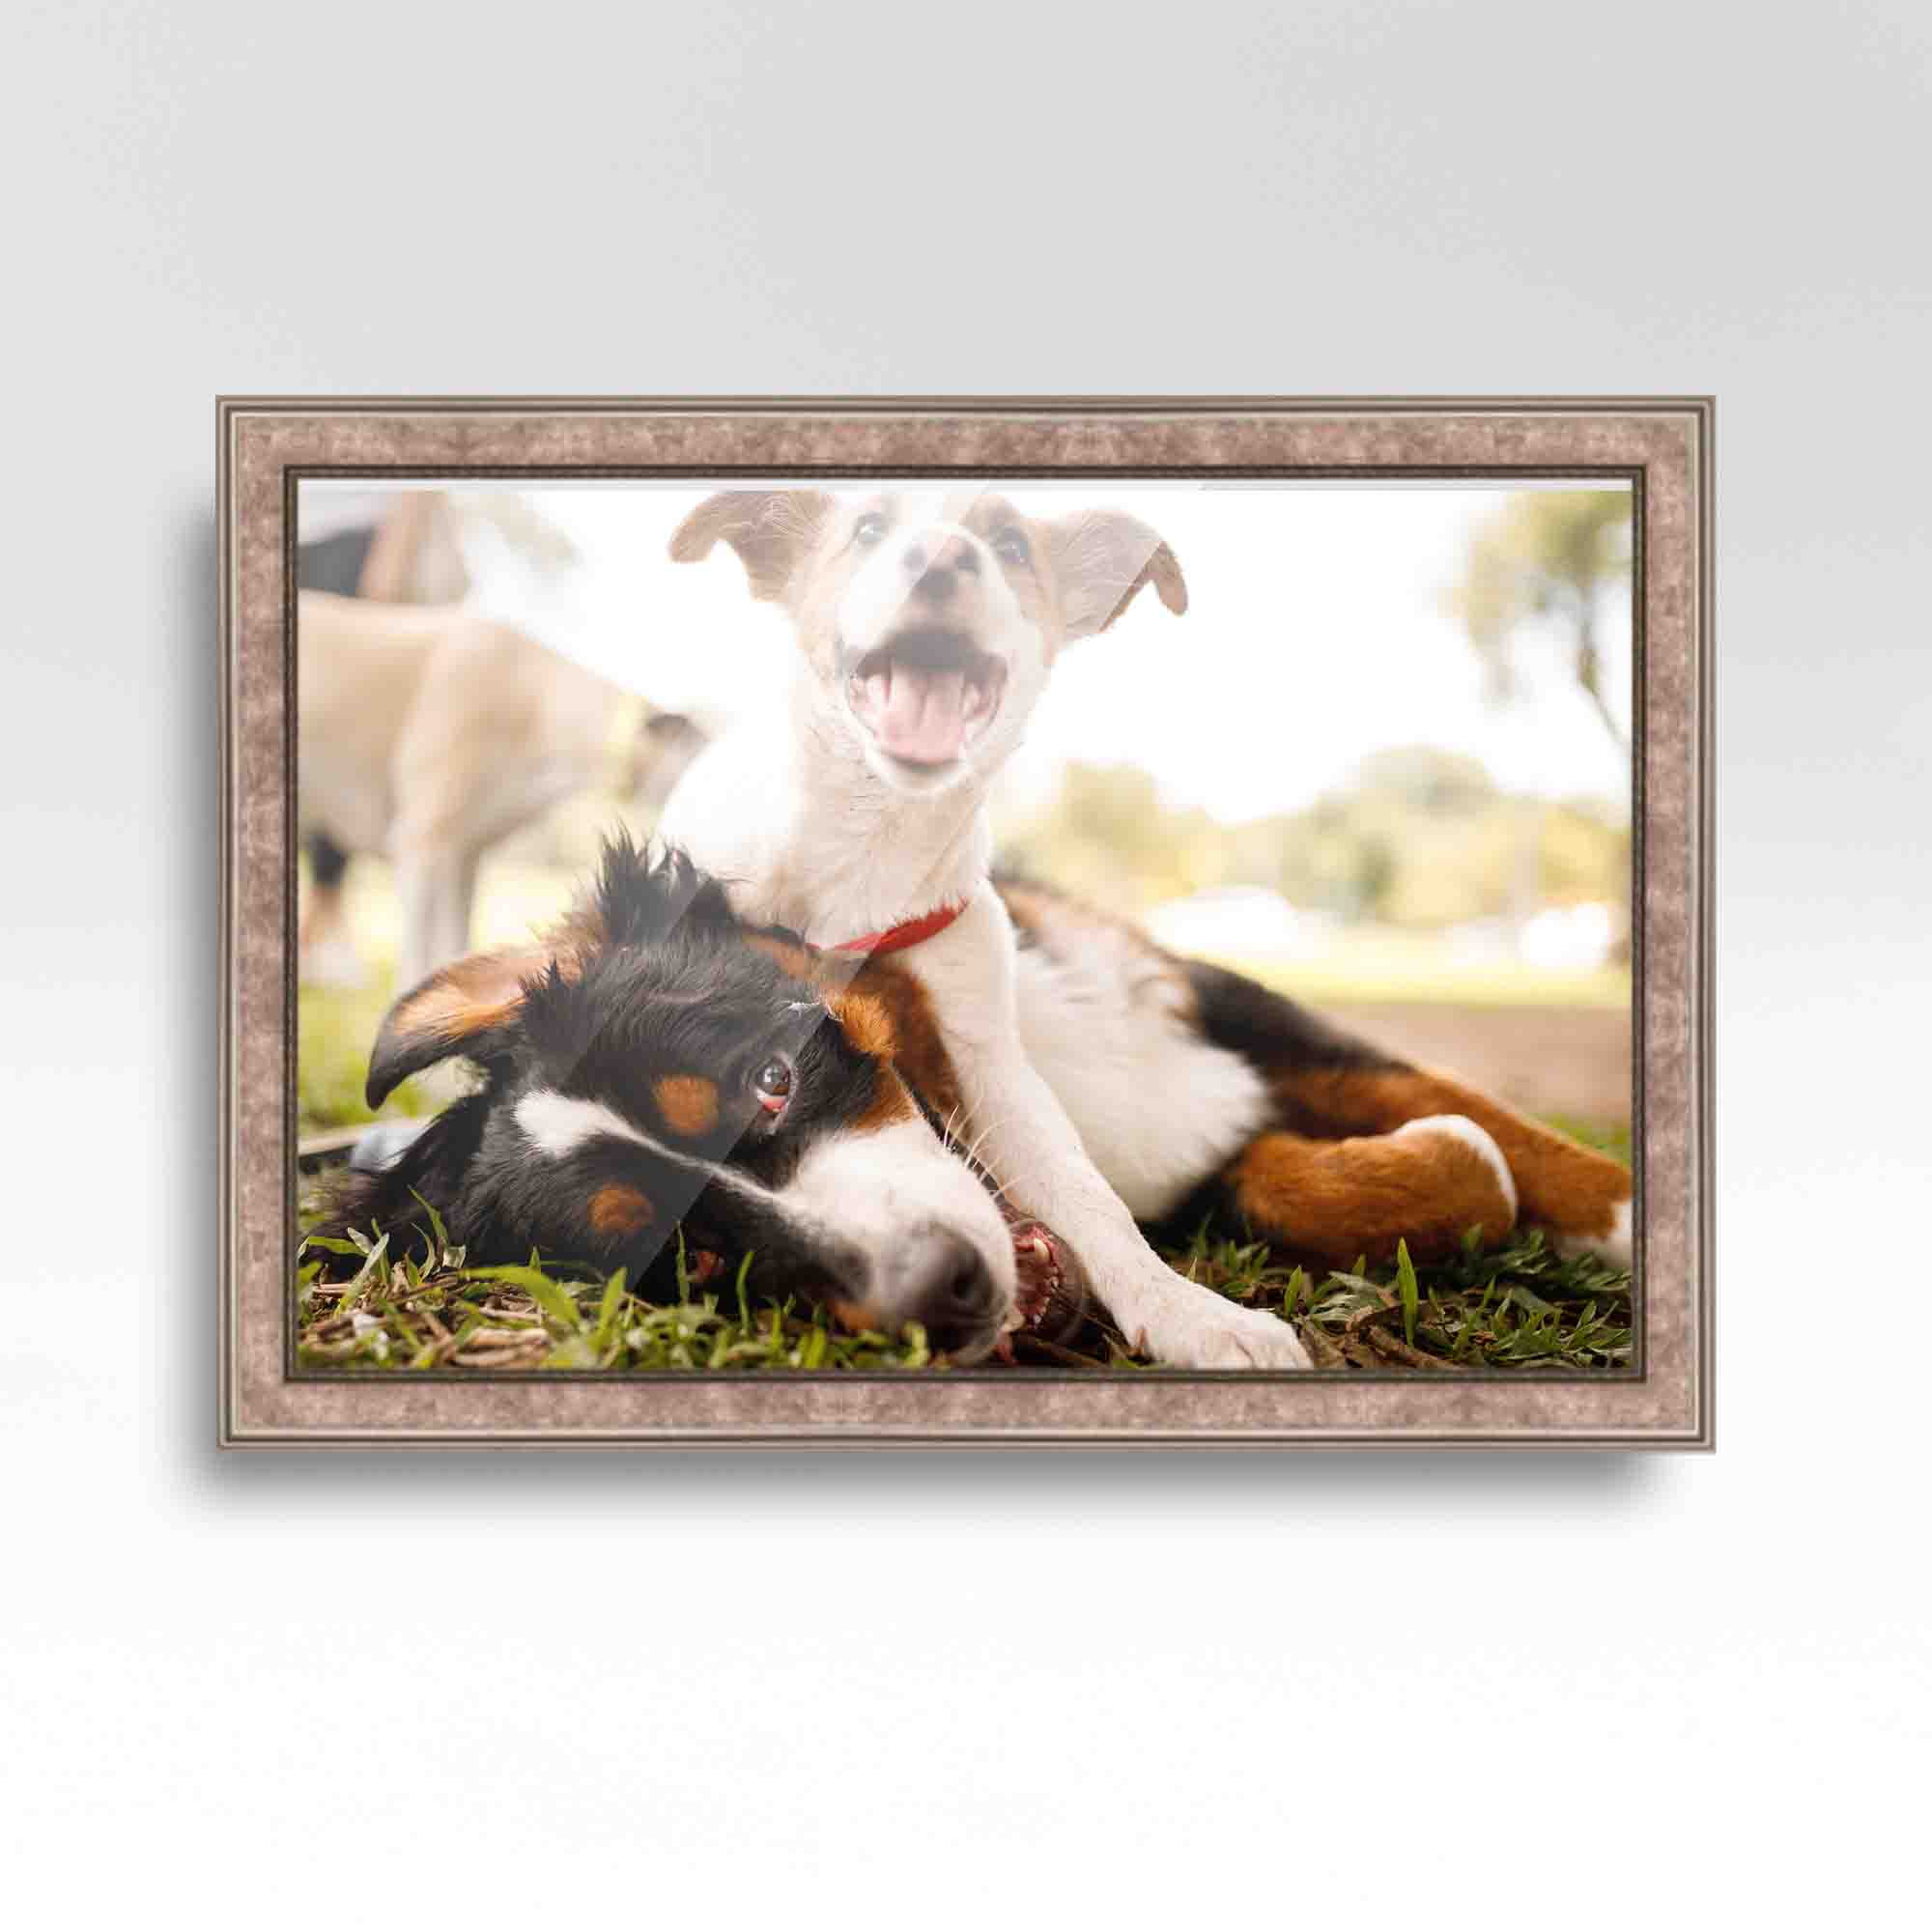 CustomPictureFrames 6x10 Silver Stainless Steel Wood Picture Frame - with Acrylic Front and Foam Board Backing